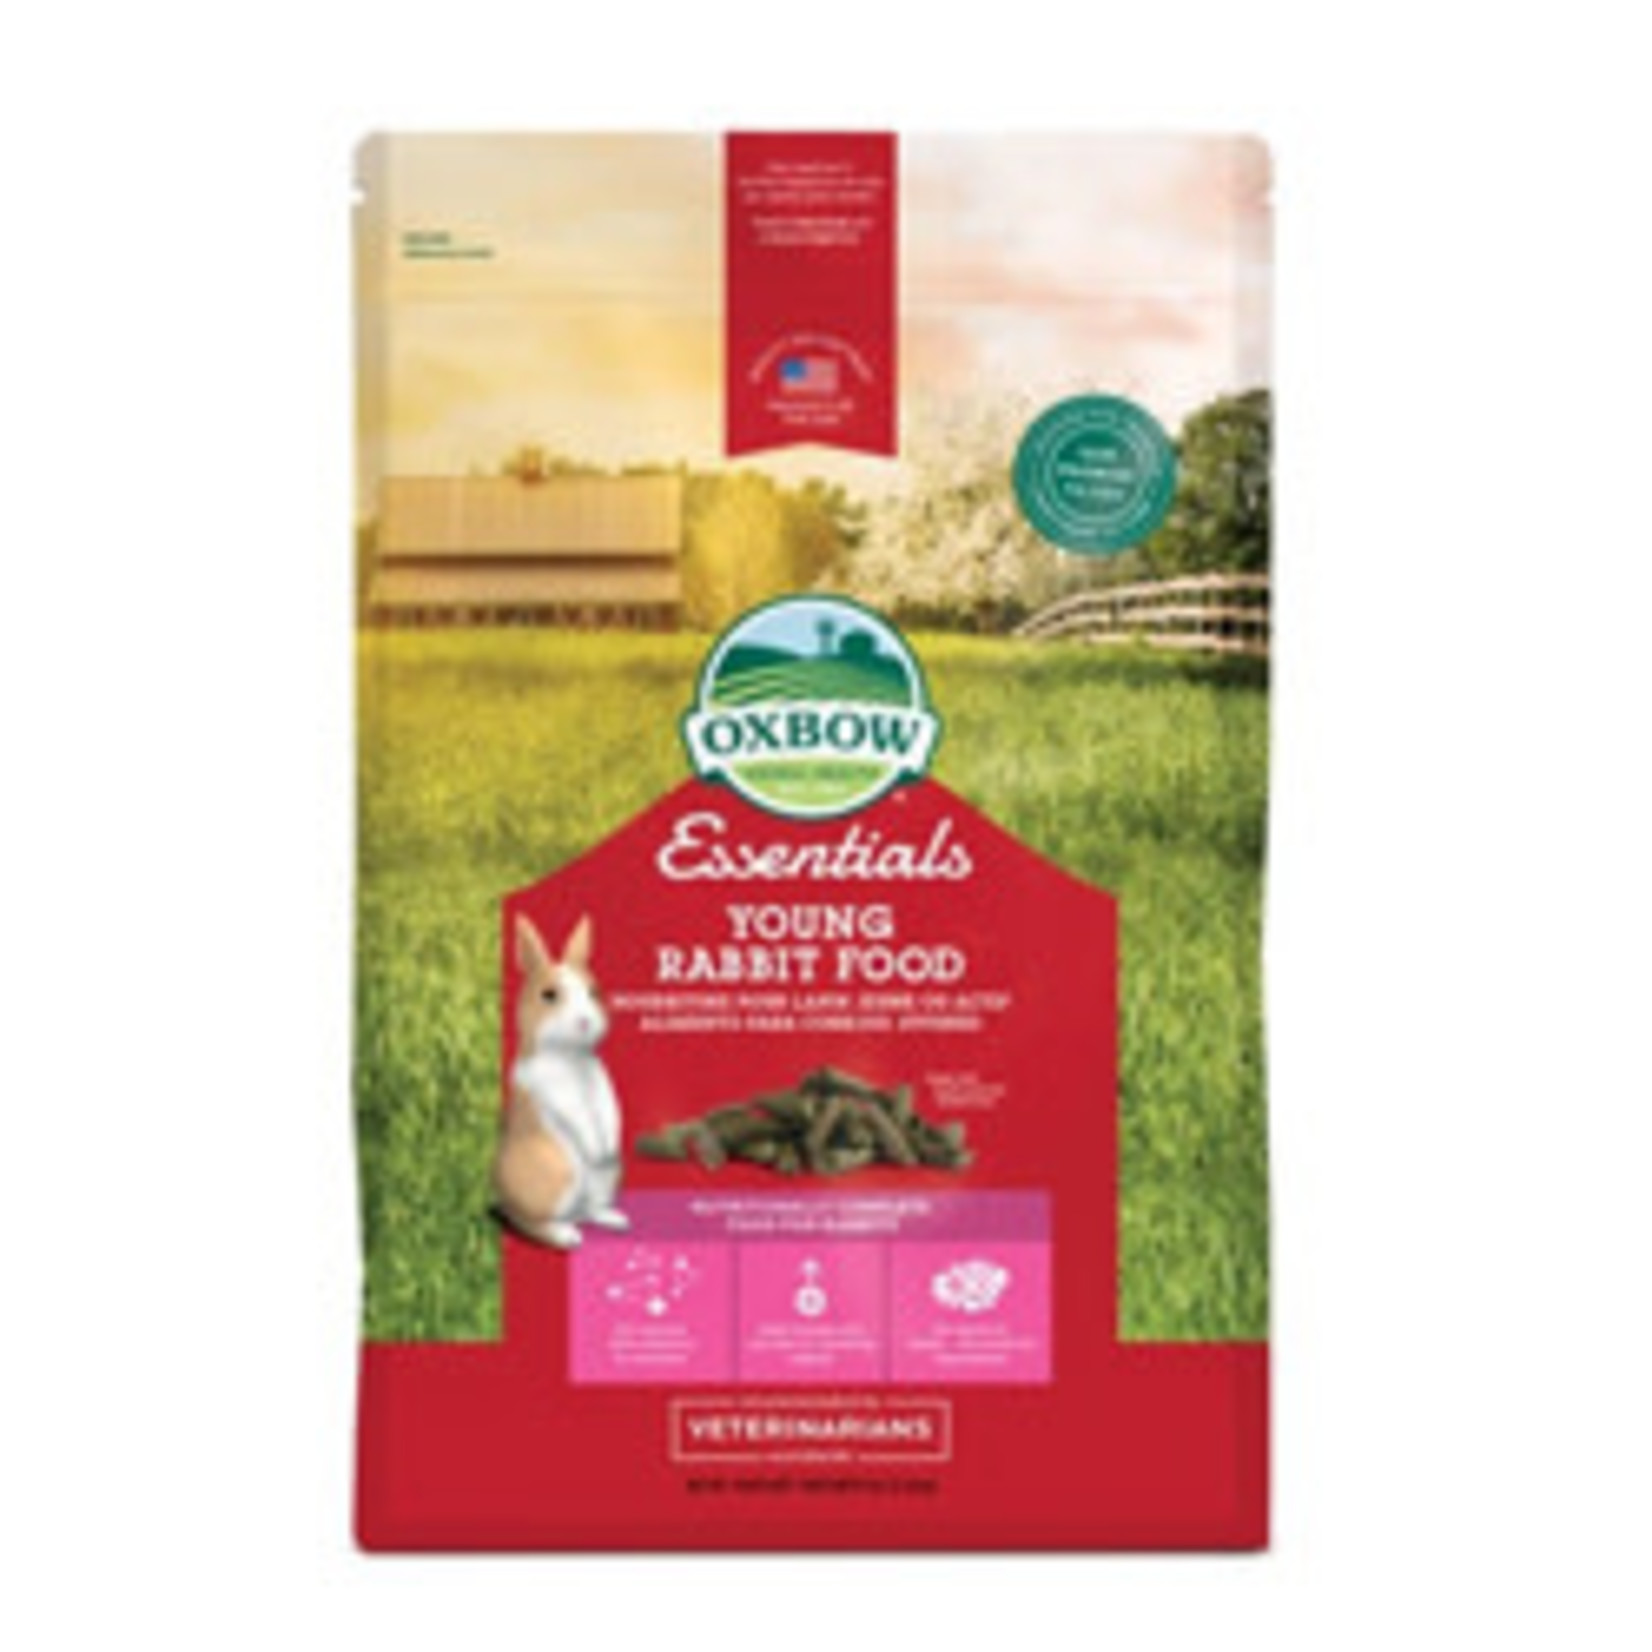 Oxbow OXBOW 5# YOUNG RABBIT FOOD ESSENTIALS